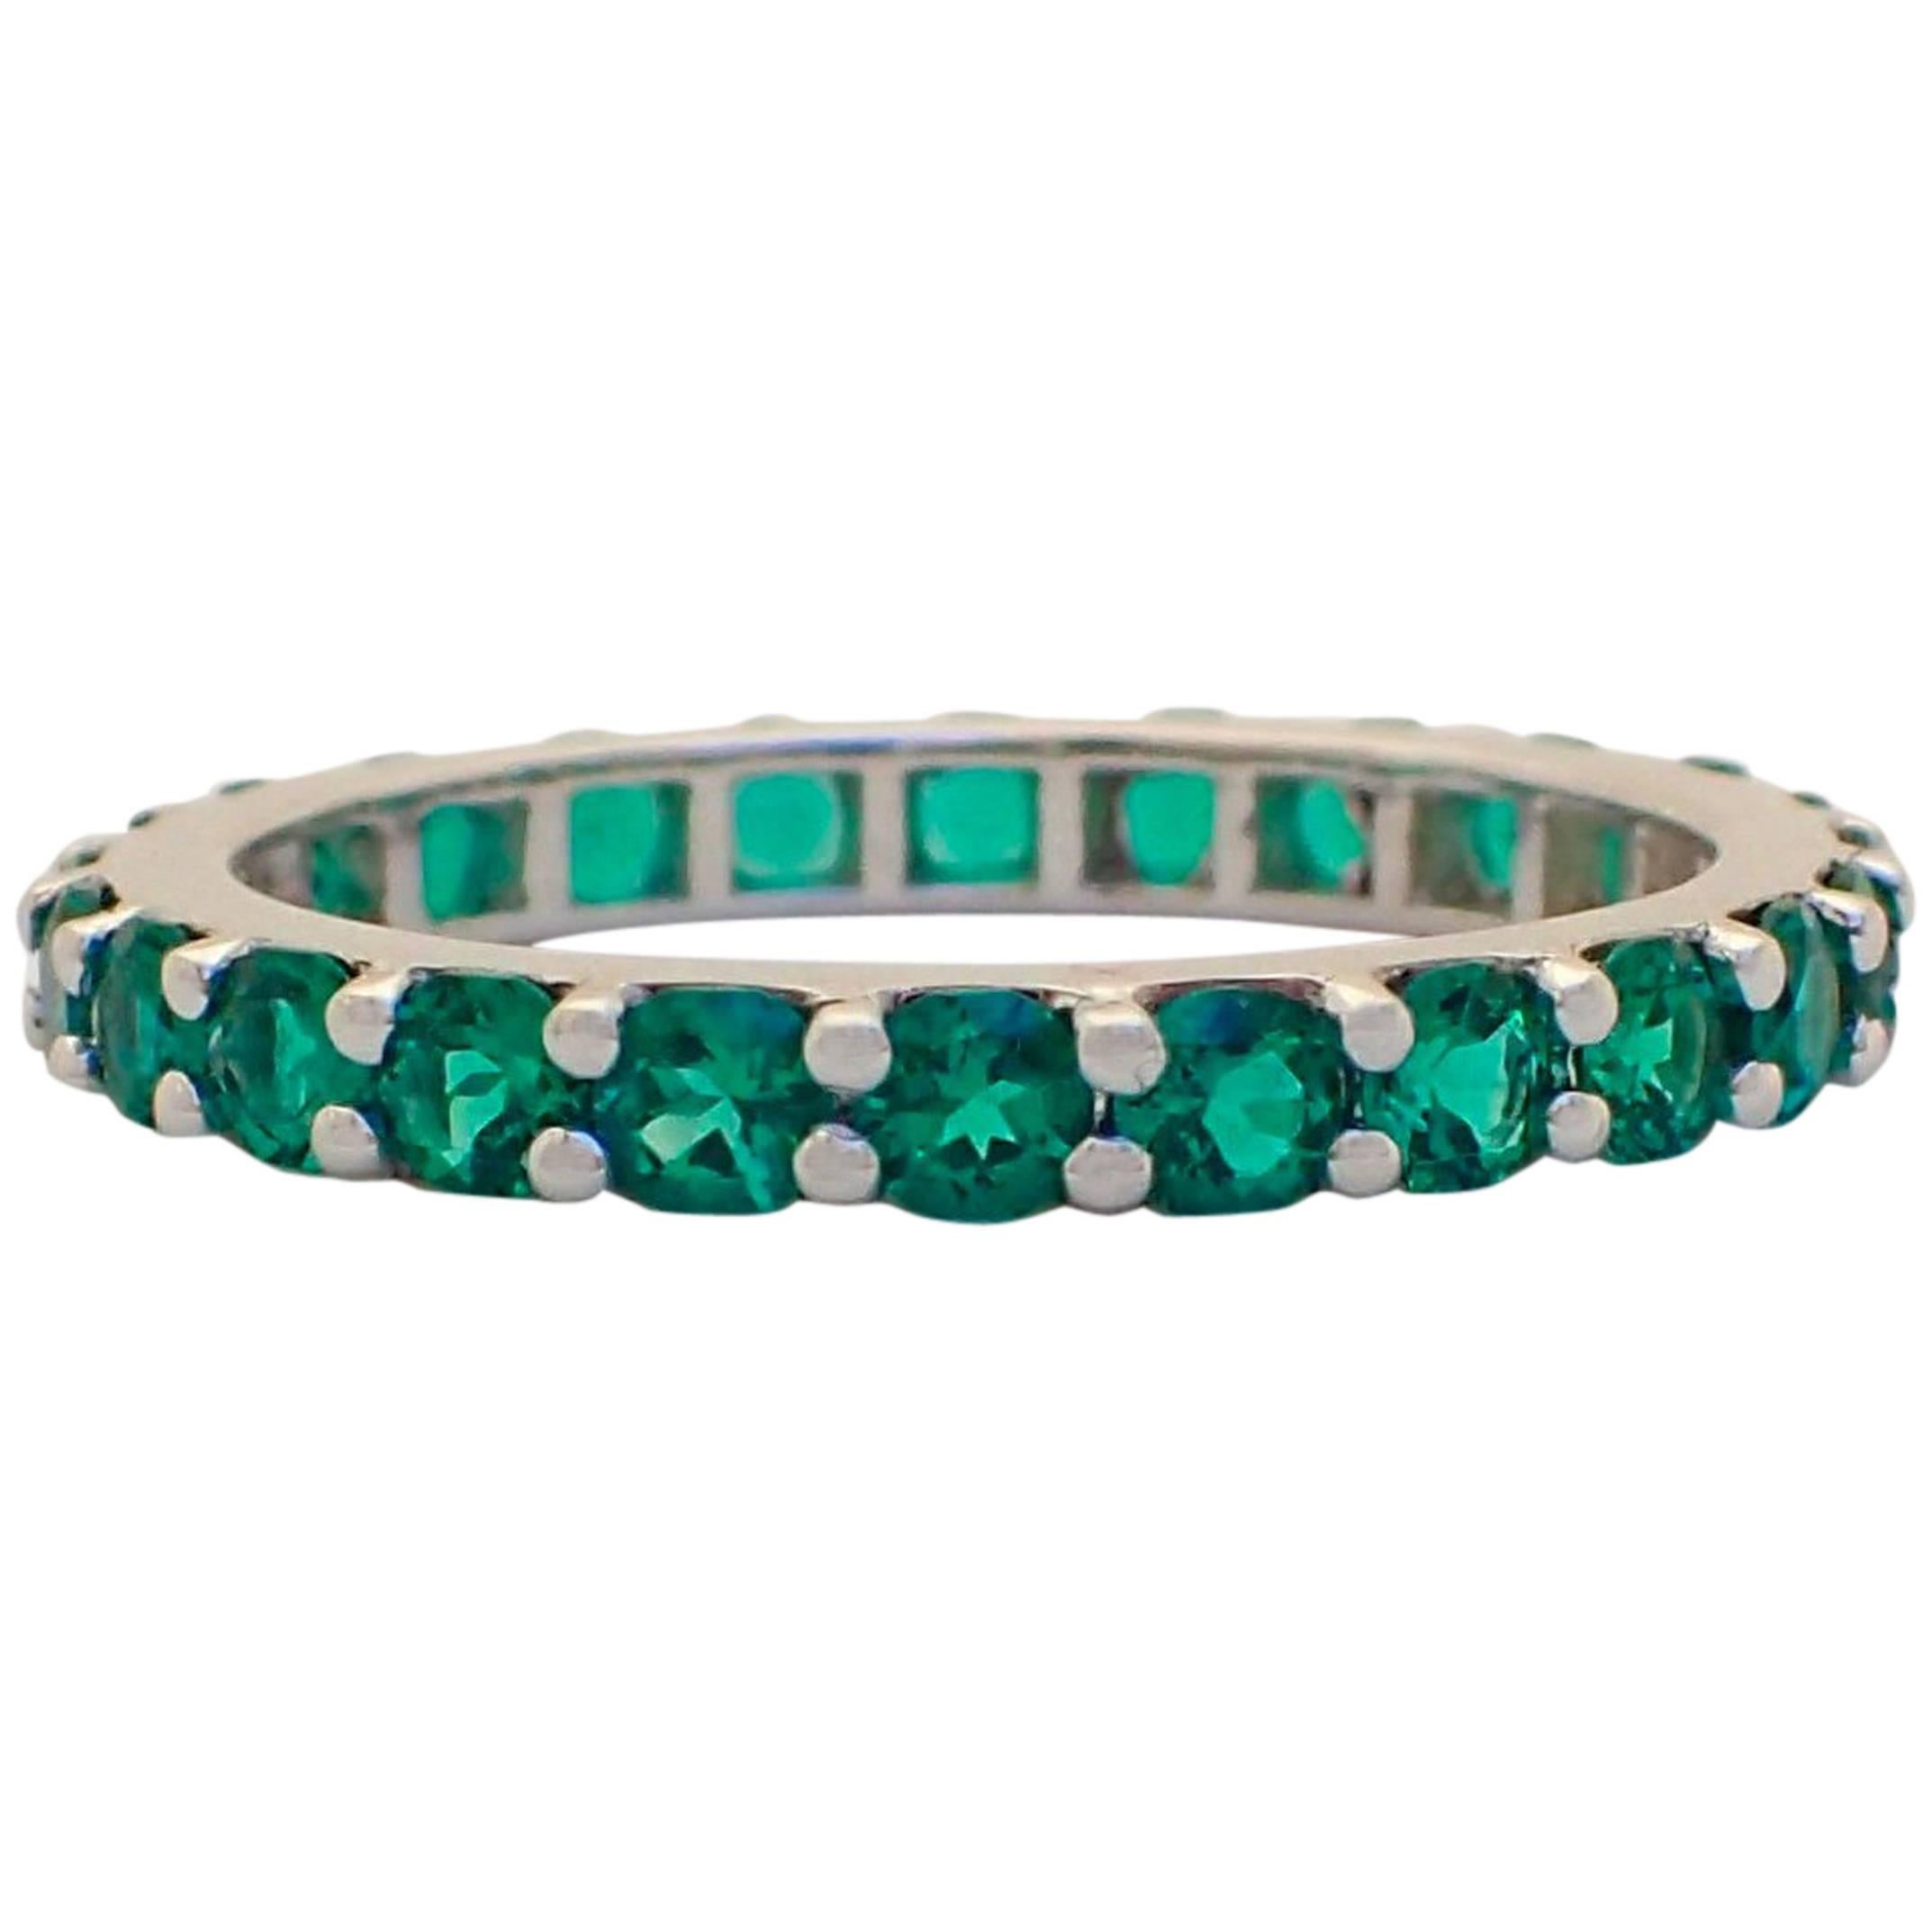 18 Karat Gold Eternity Band with Chatham-Created Emeralds Weighing 1.22 Carat